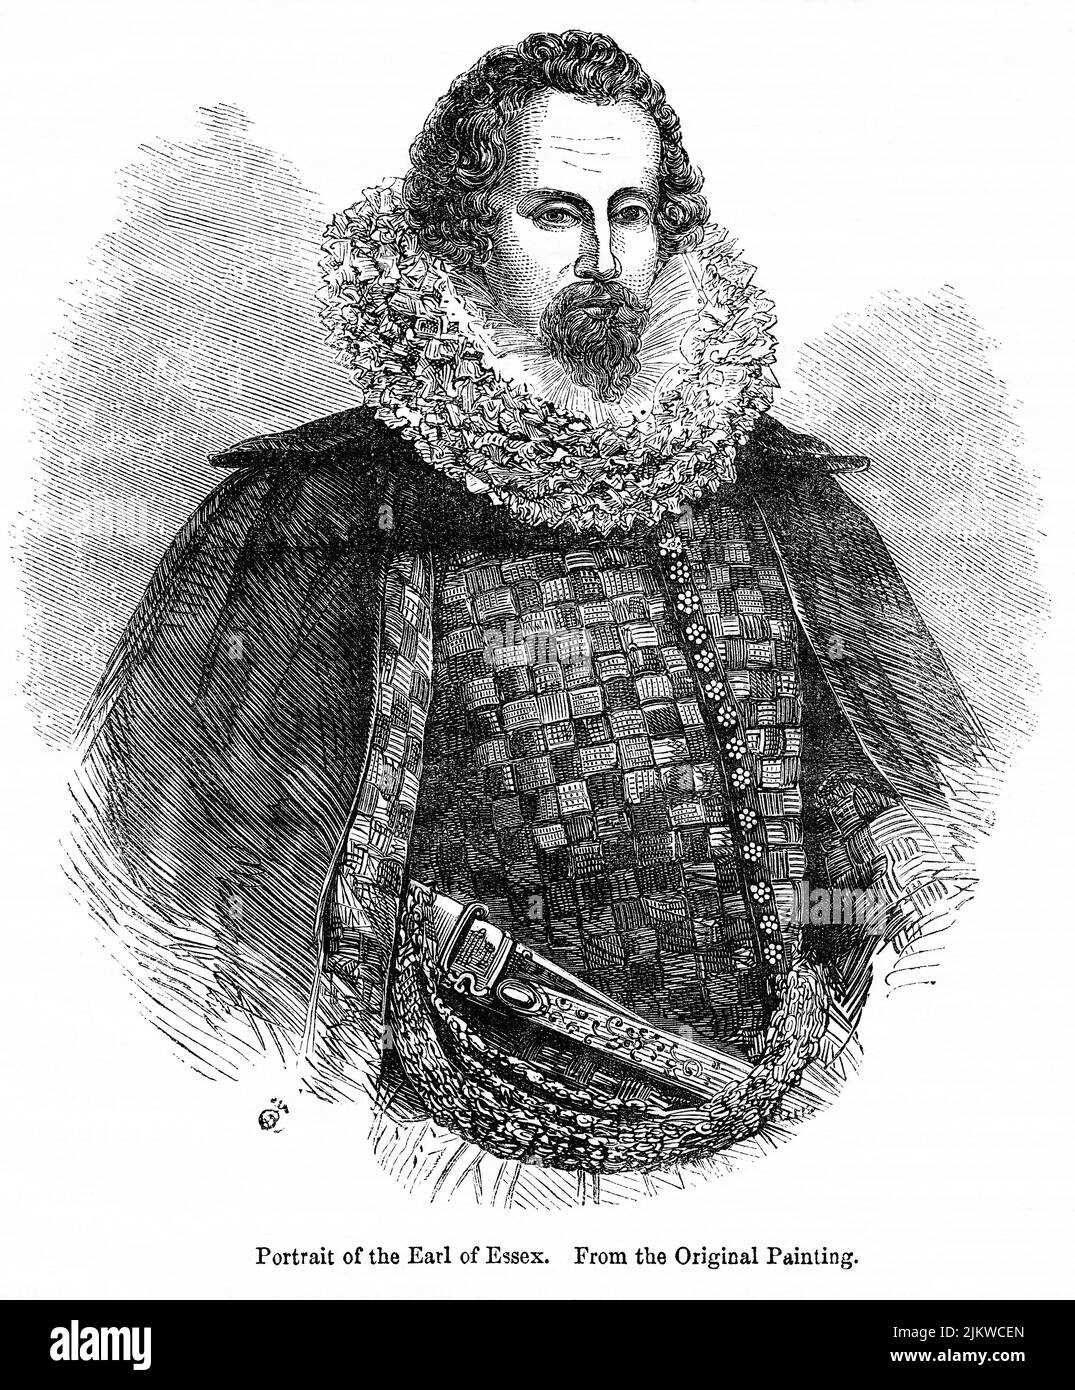 Portrait of the Earl of Essex, Illustration from the Book, 'John Cassel’s Illustrated History of England, Volume II', text by William Howitt, Cassell, Petter, and Galpin, London, 1858 Stock Photo